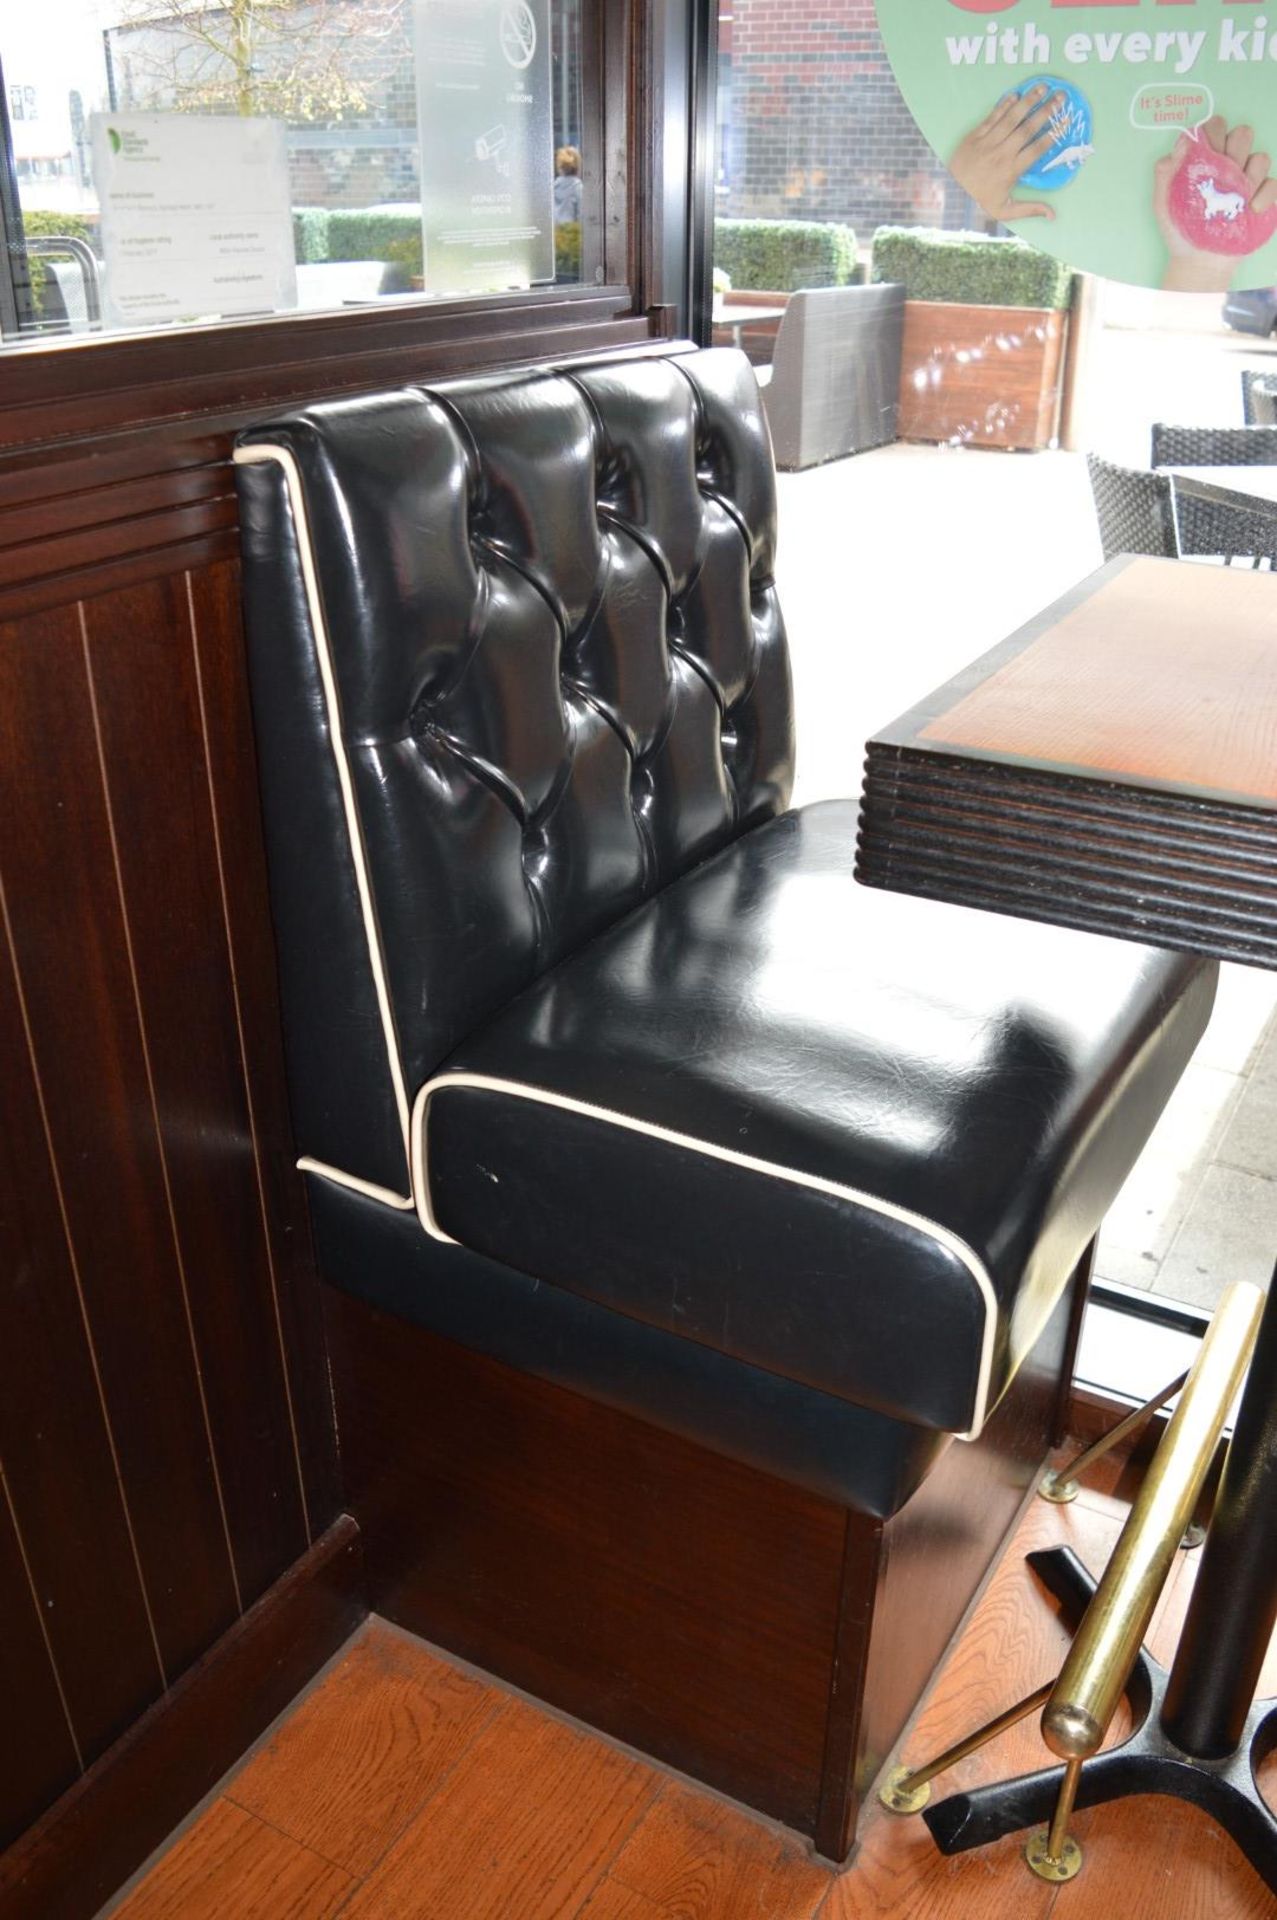 3 x Sections of Restaurant / Cafe Booth Seating With Two Poser Tables - Black Faux Leather - Image 17 of 17